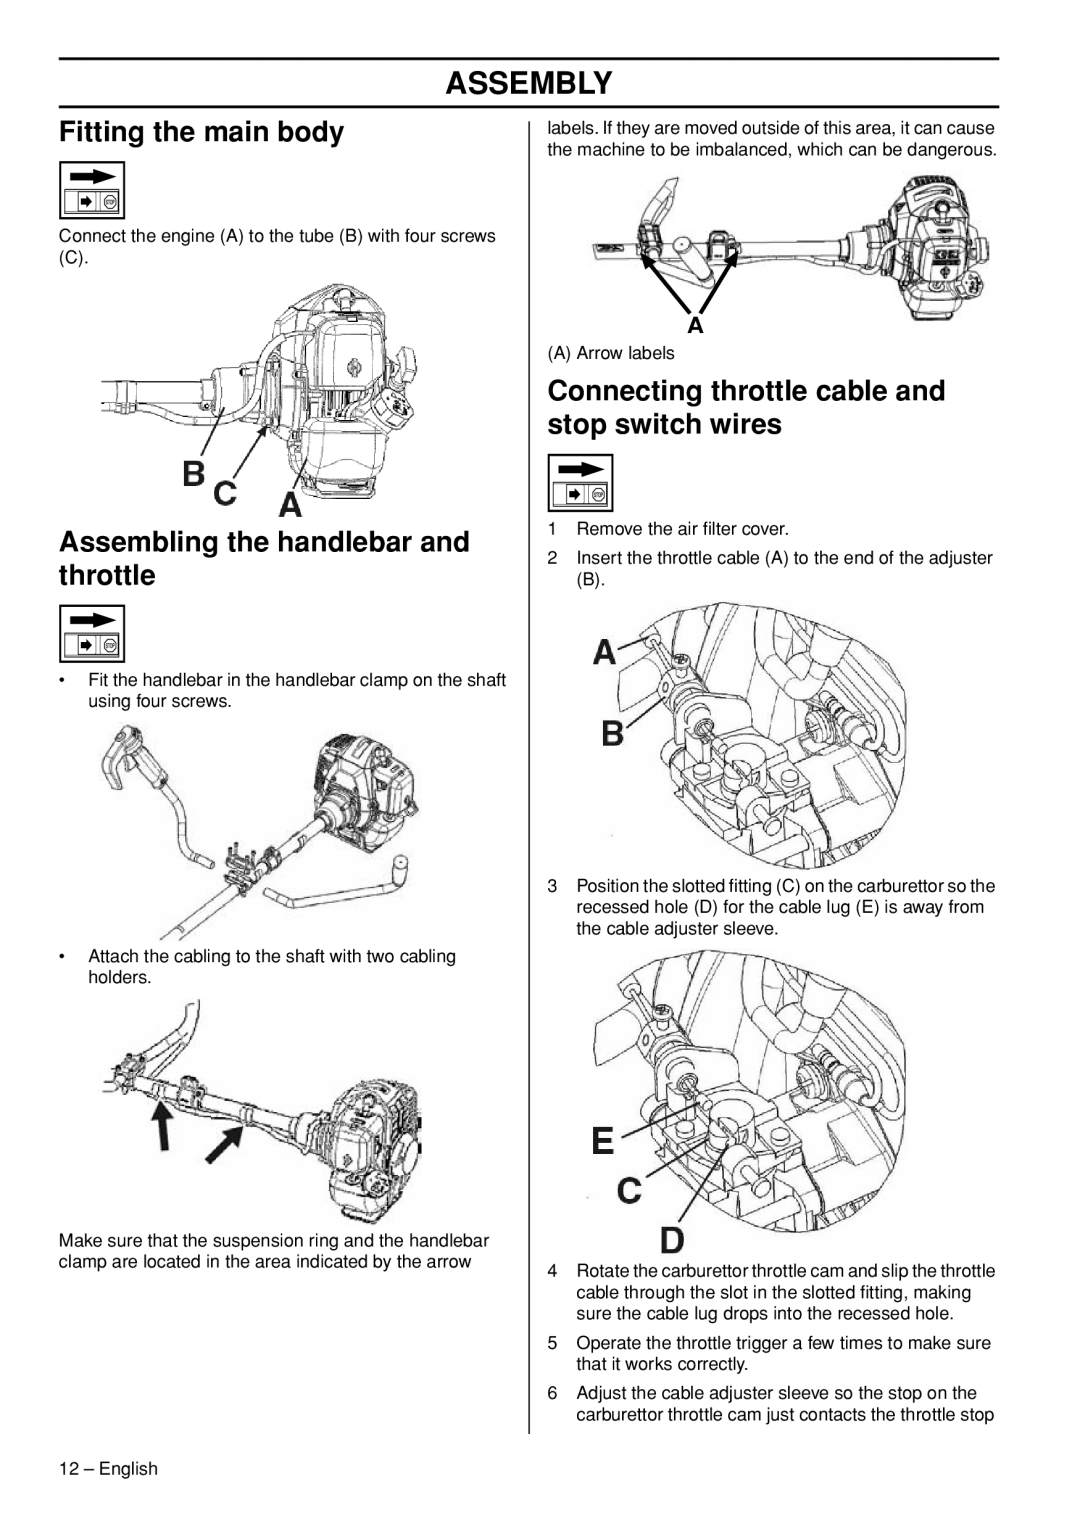 Husqvarna 143R-II manual Assembly, Fitting the main body, Assembling the handlebar and throttle 